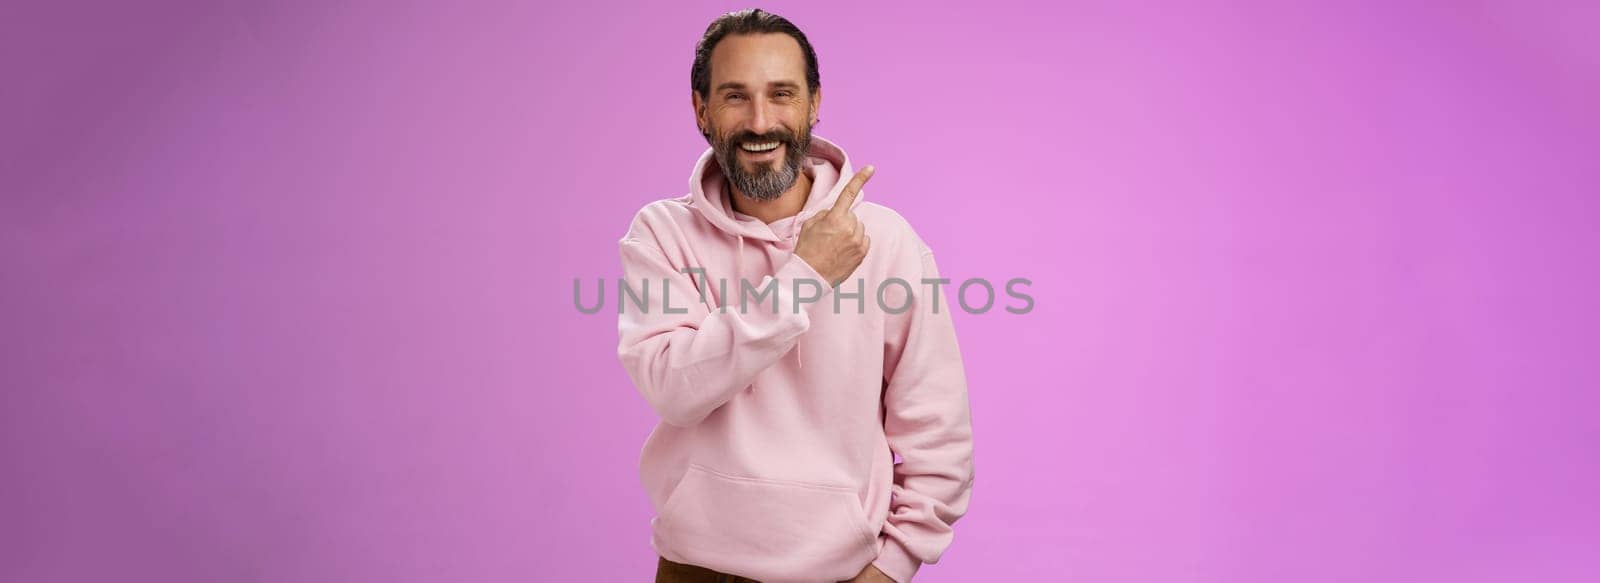 Charming friendly happy mature man 50s bearded grey hair laughing happily pointing upper left corner behind showing proudly family members standing purple background having fun stay positive. Lifestyle.